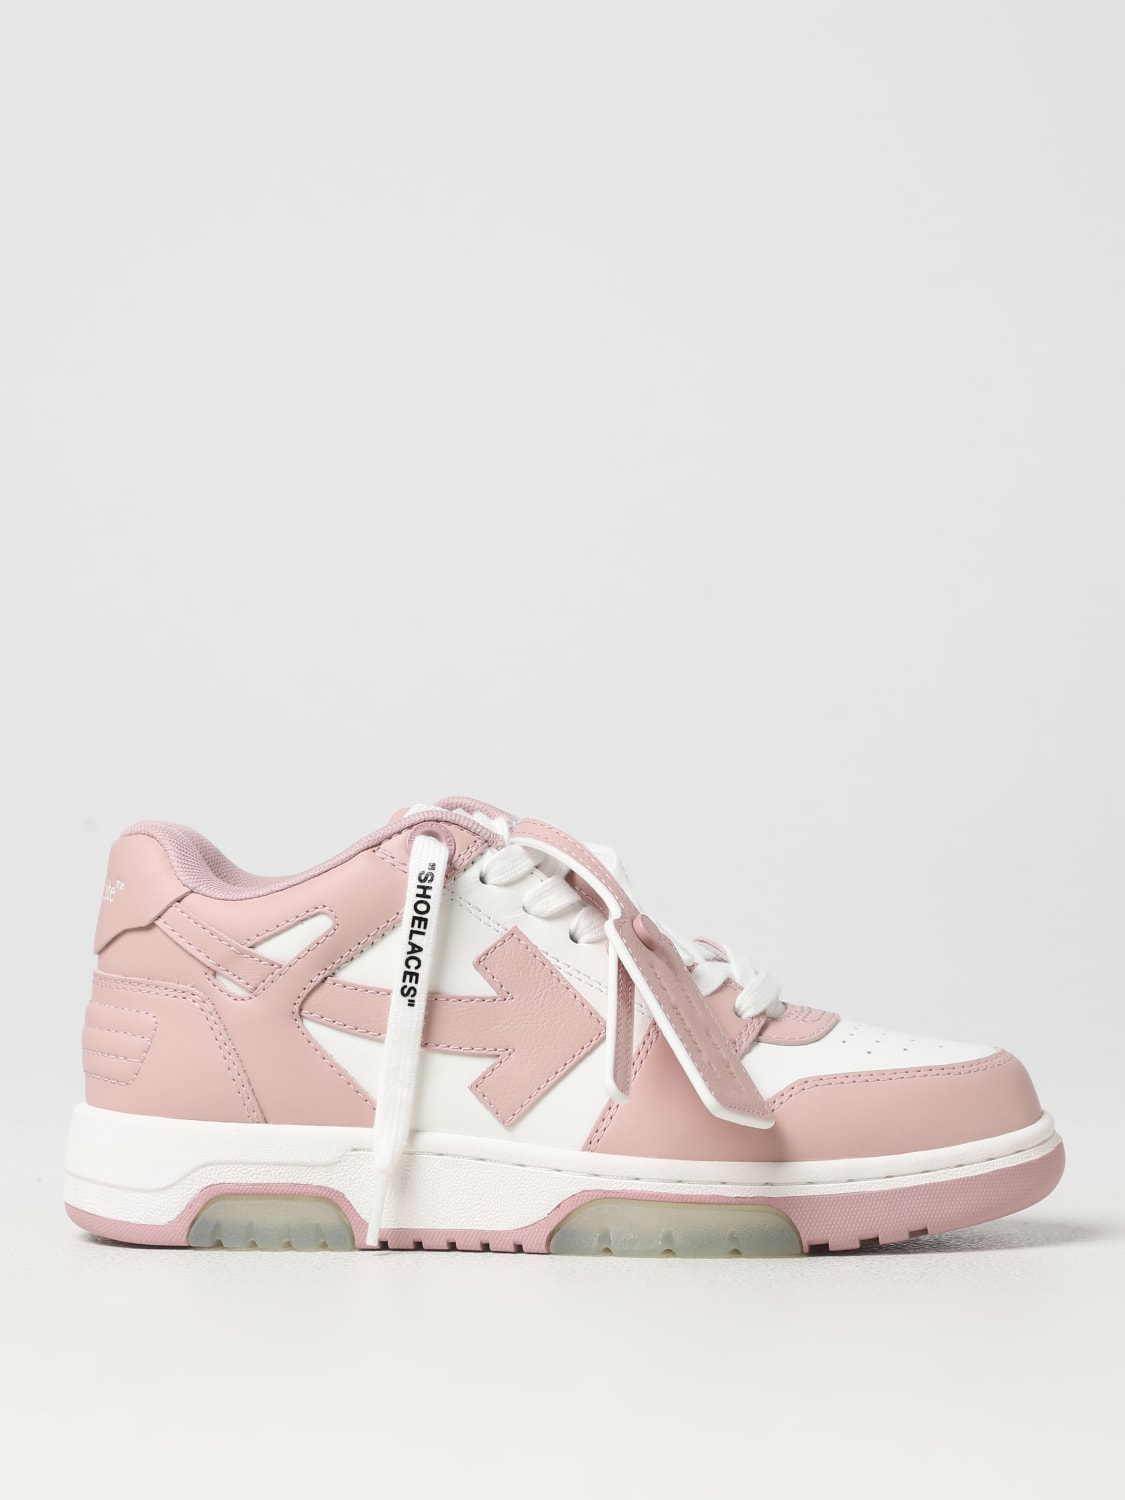 Off-White Out Of Office White And Pink Sneakers New